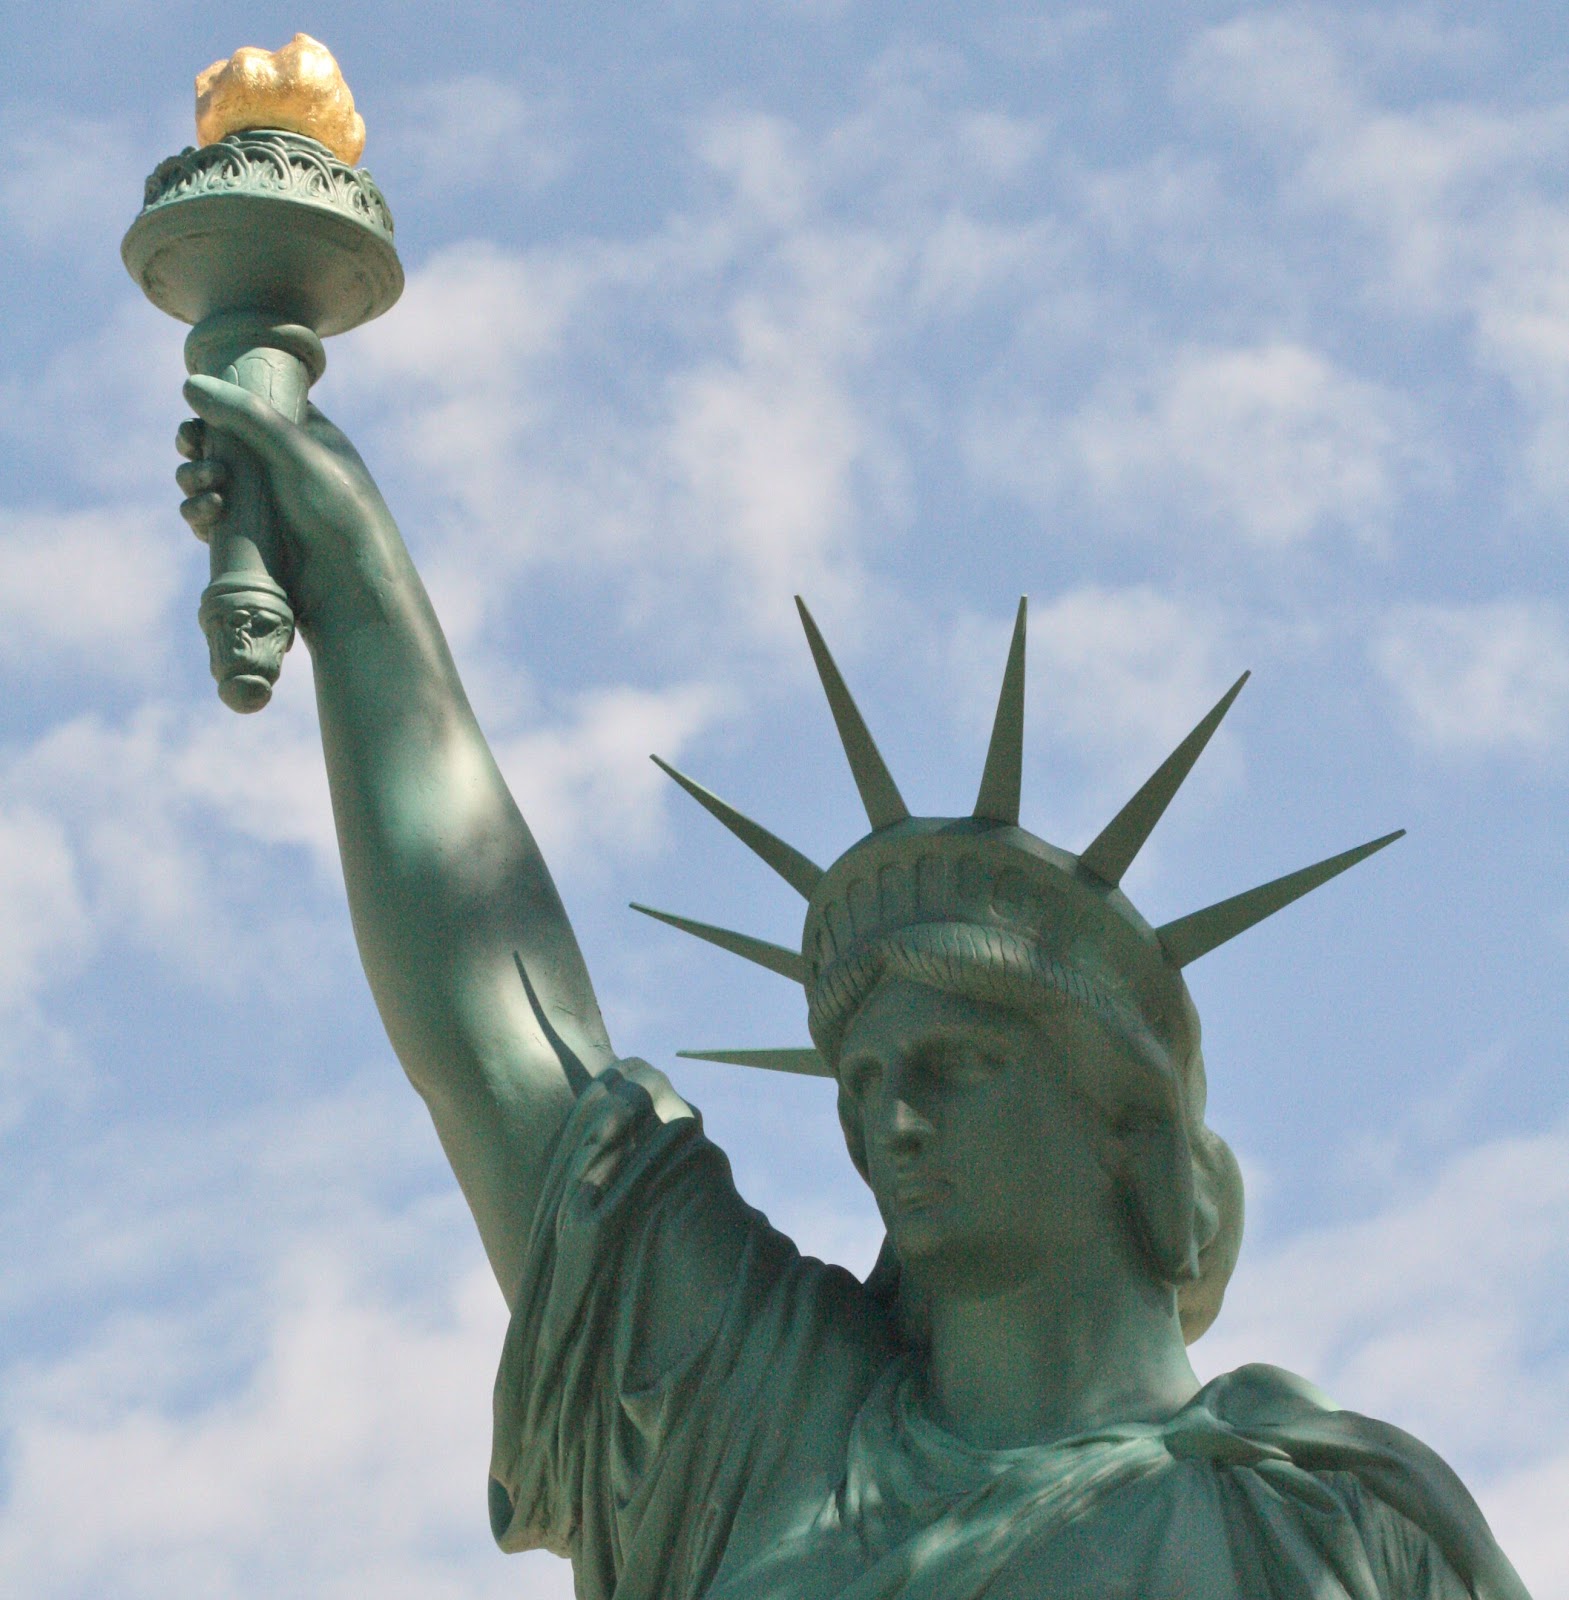 The Statue of Liberty Enlightening the World